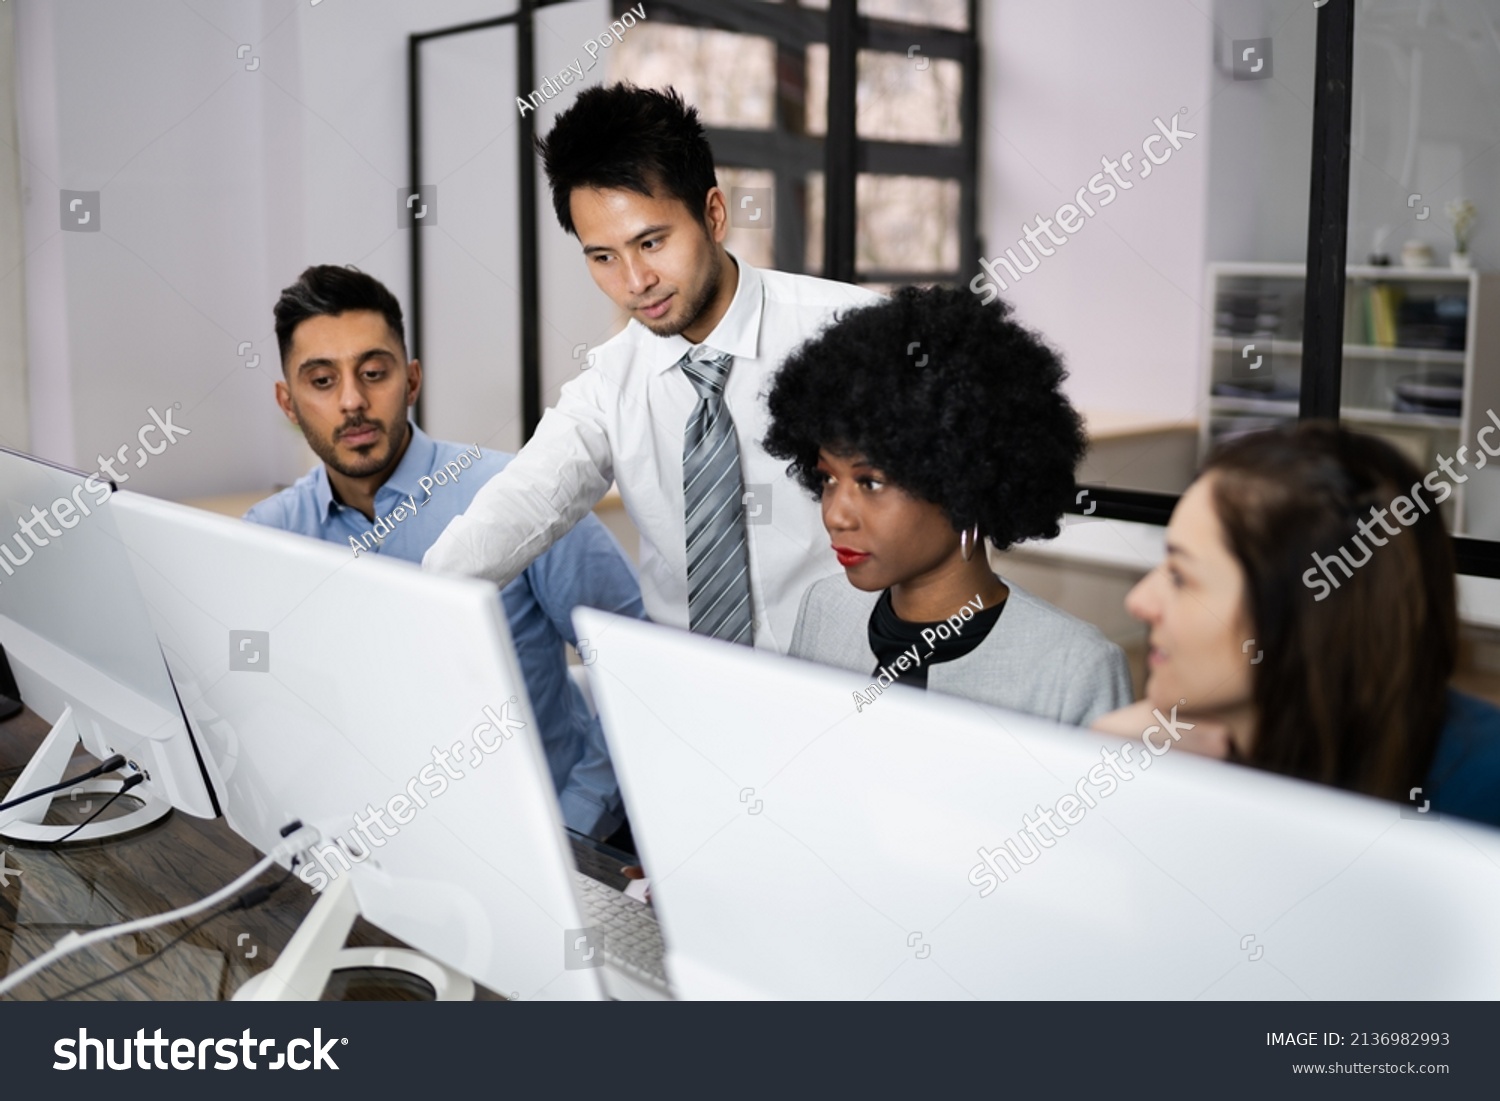 Group Of Happy Business People Using Laptop Discussing At Workplace In Office #2136982993